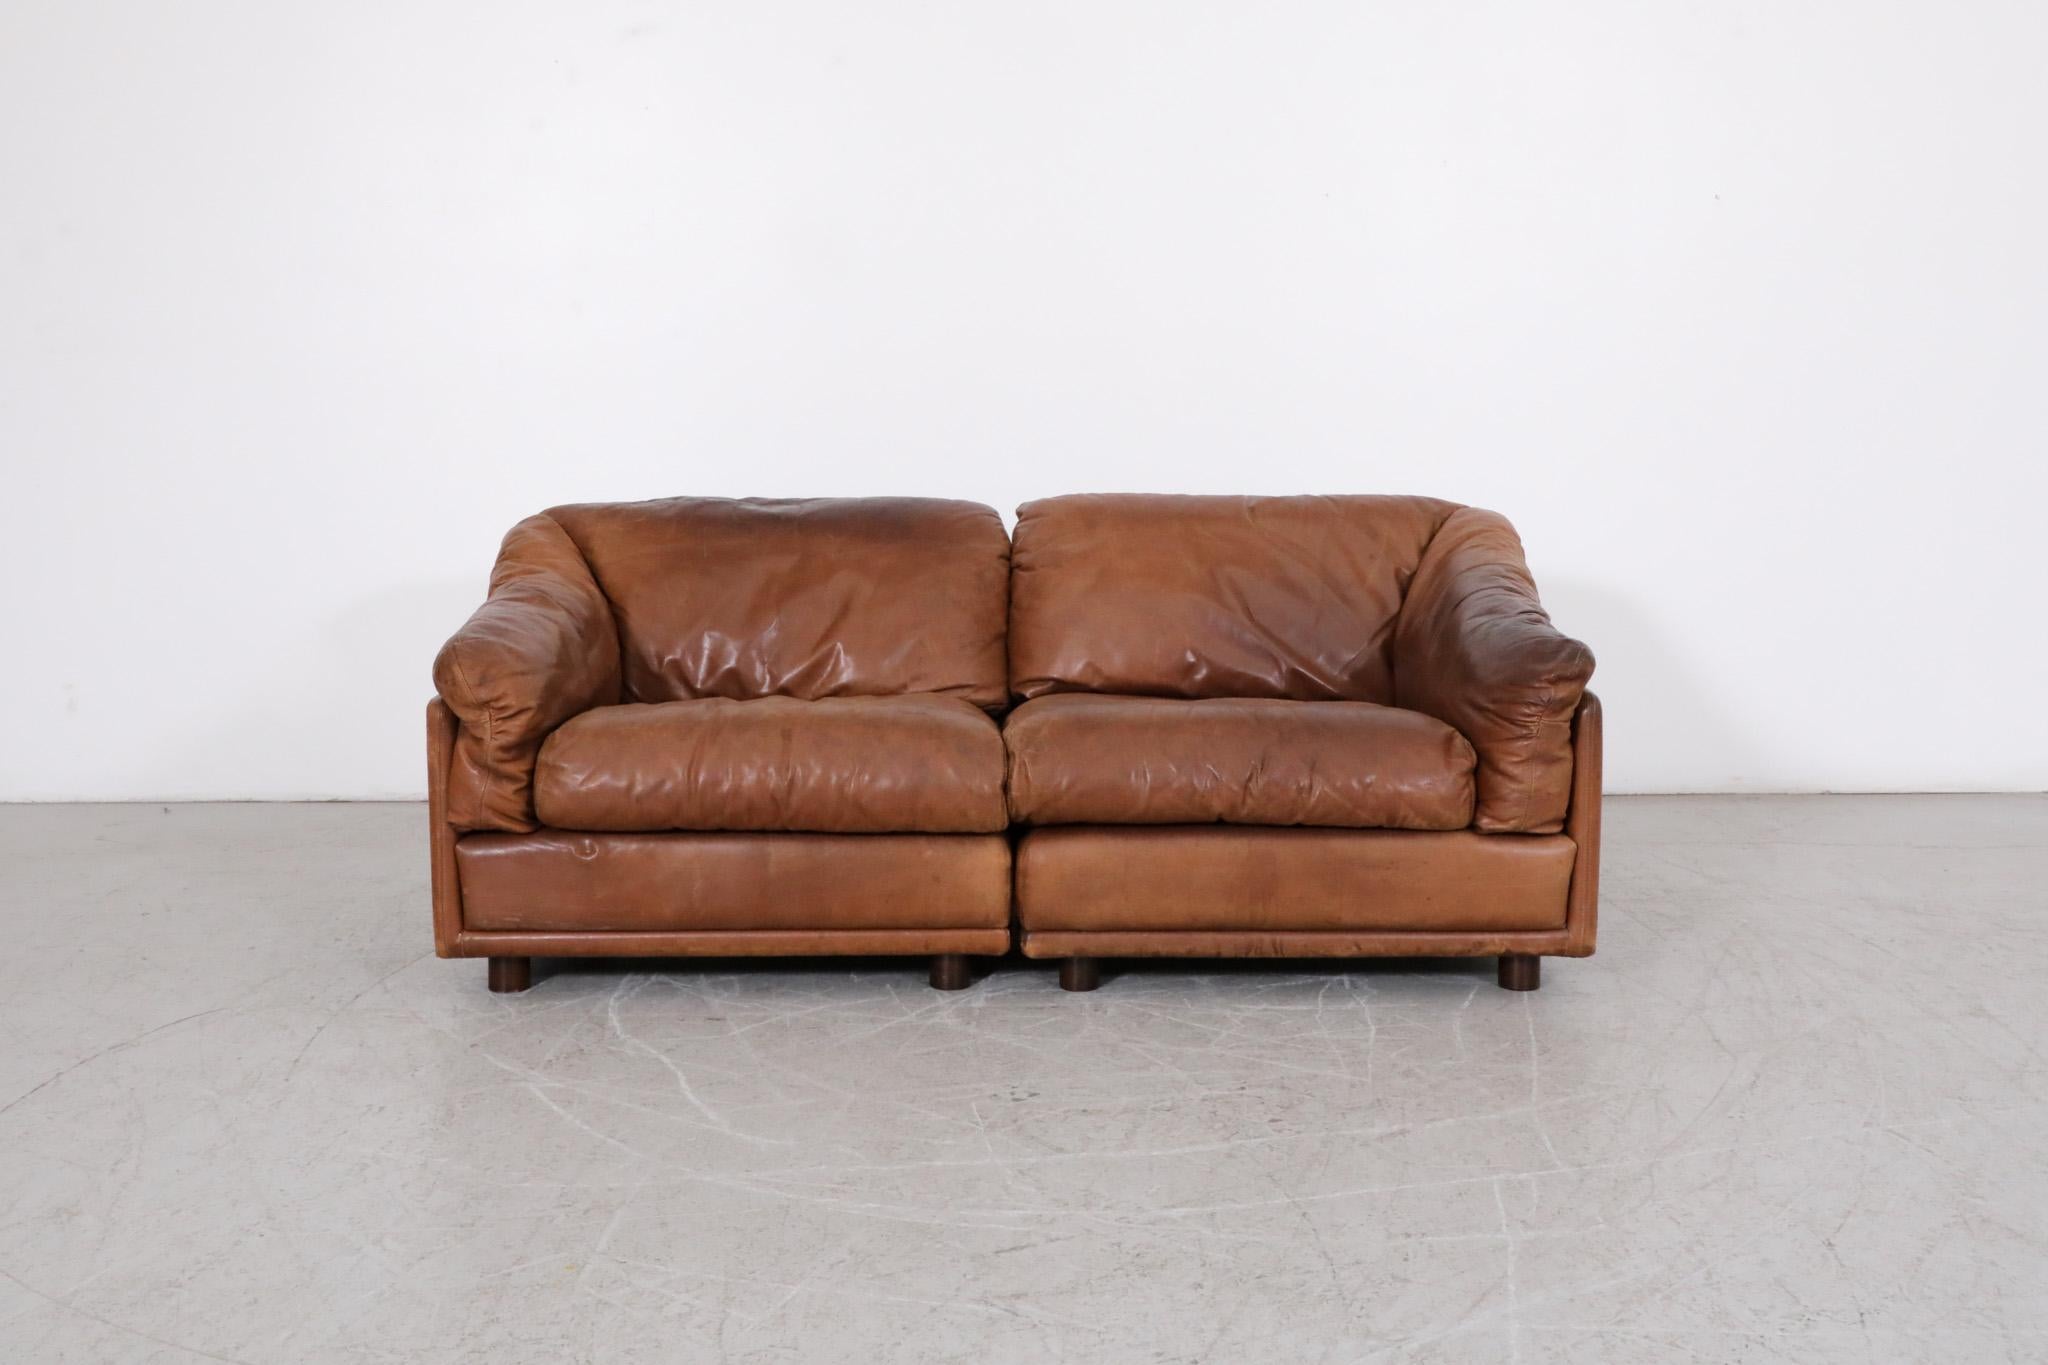 Mid-Century Leolux modular loveseat with cognac leather frame and gorgeous patina. A cozy 2 piece sofa set with removable cushions and small round wood feet. In original condition with some visible wear consistent with age and moderate use. 